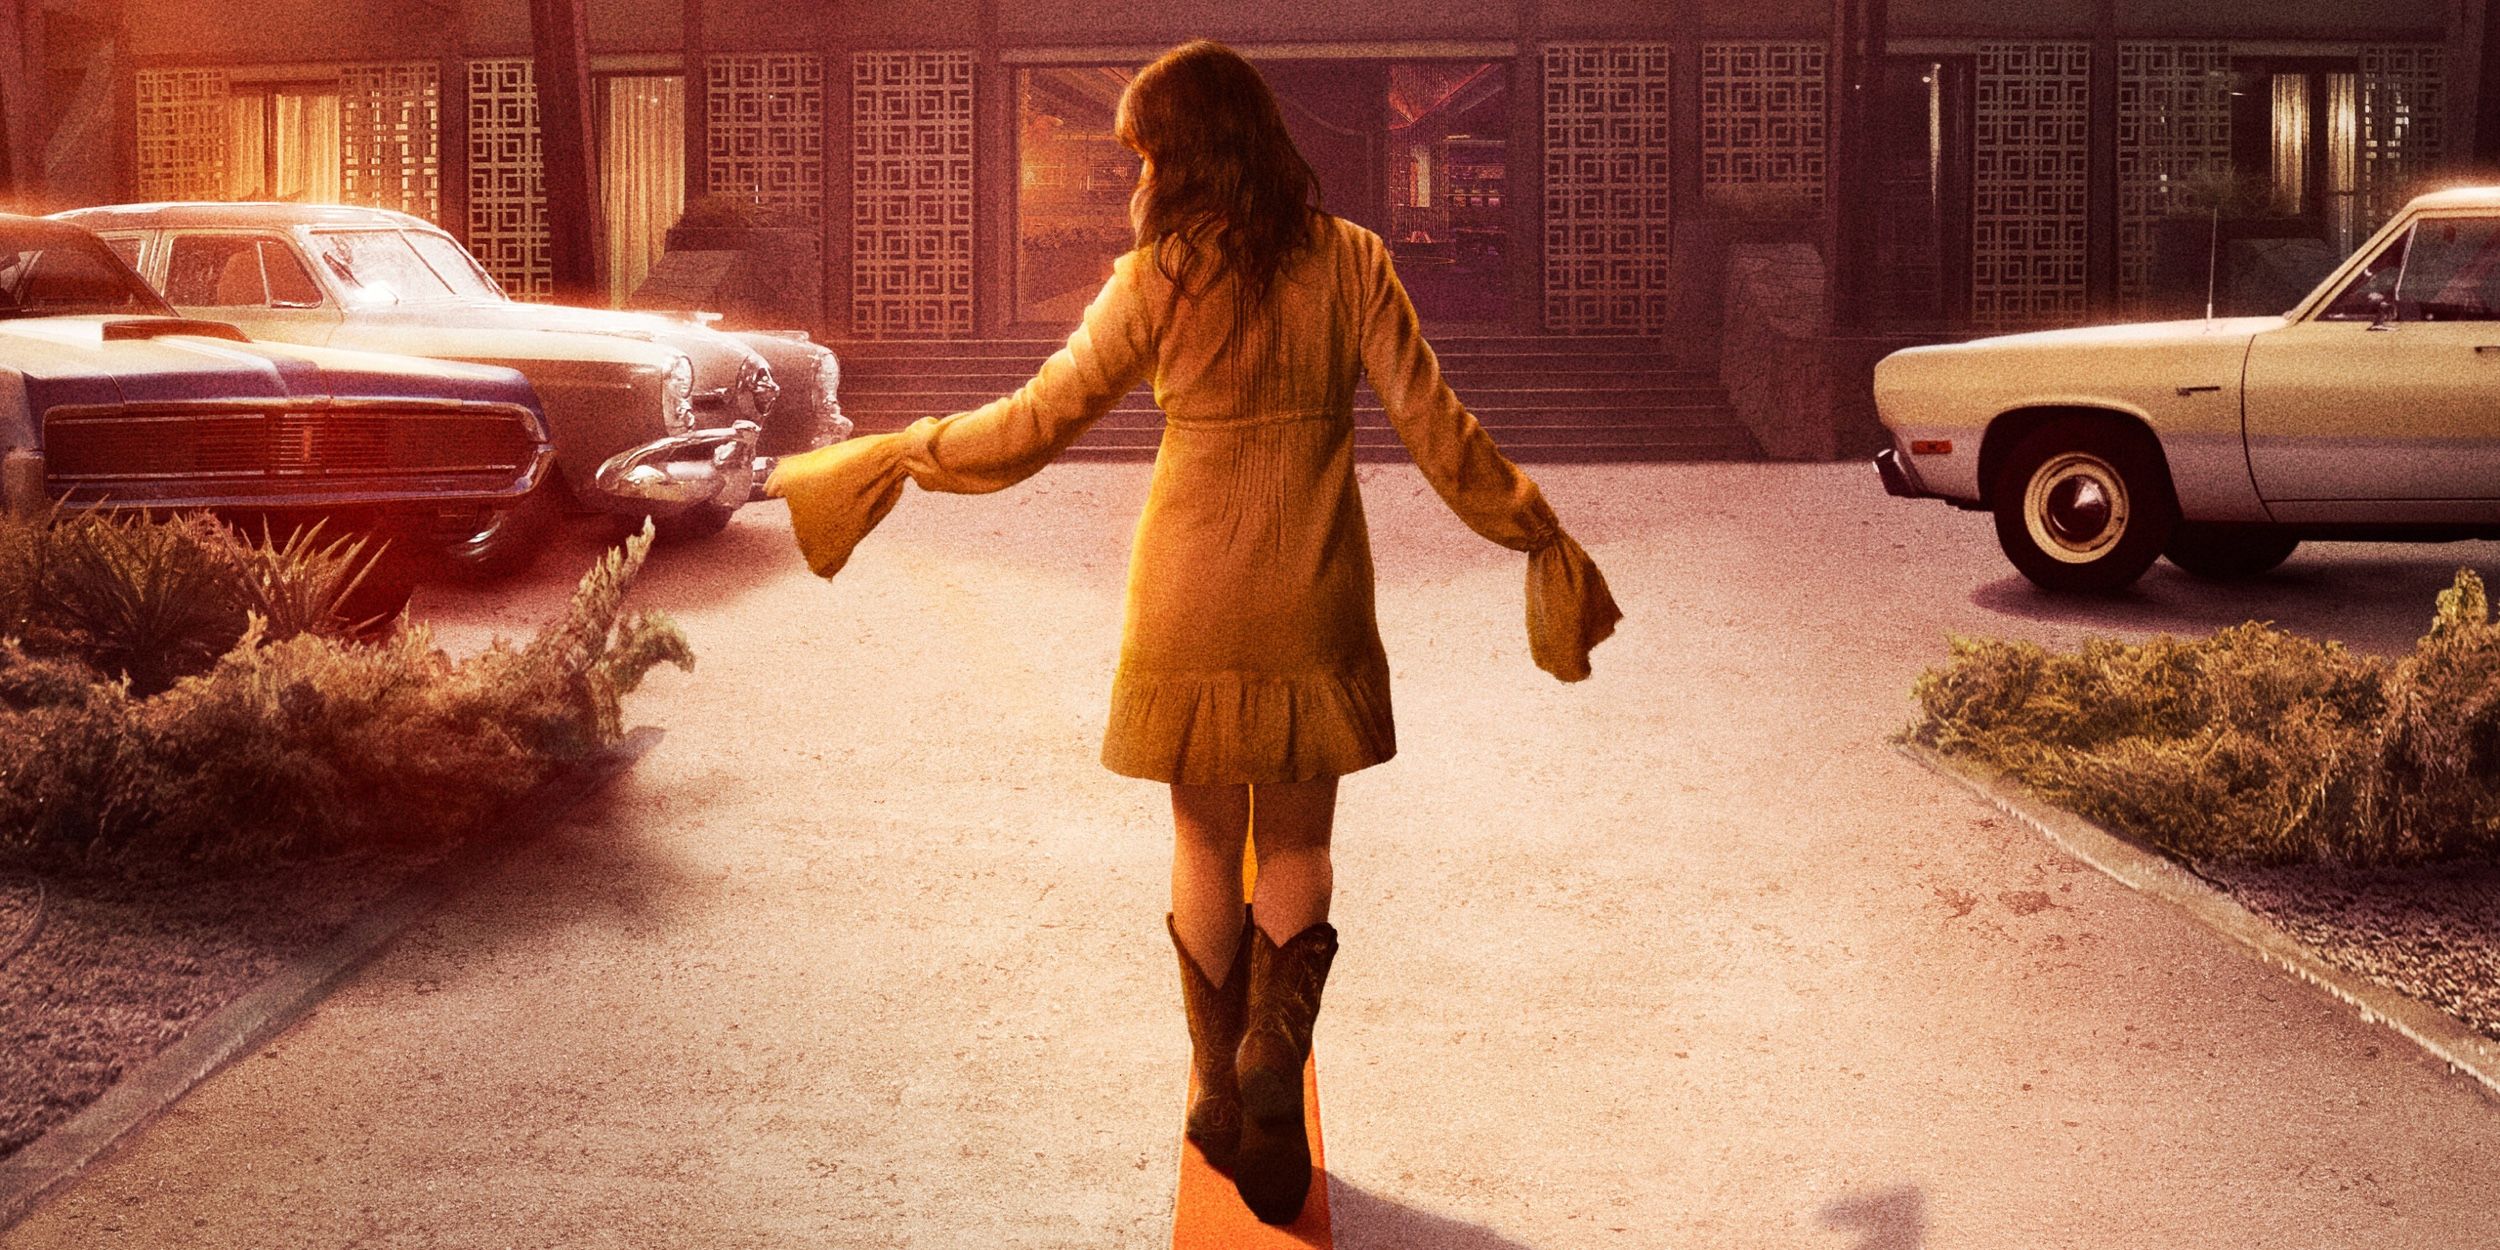 Rose standing in the middle of a parking lot in Bad Times at the El Royale